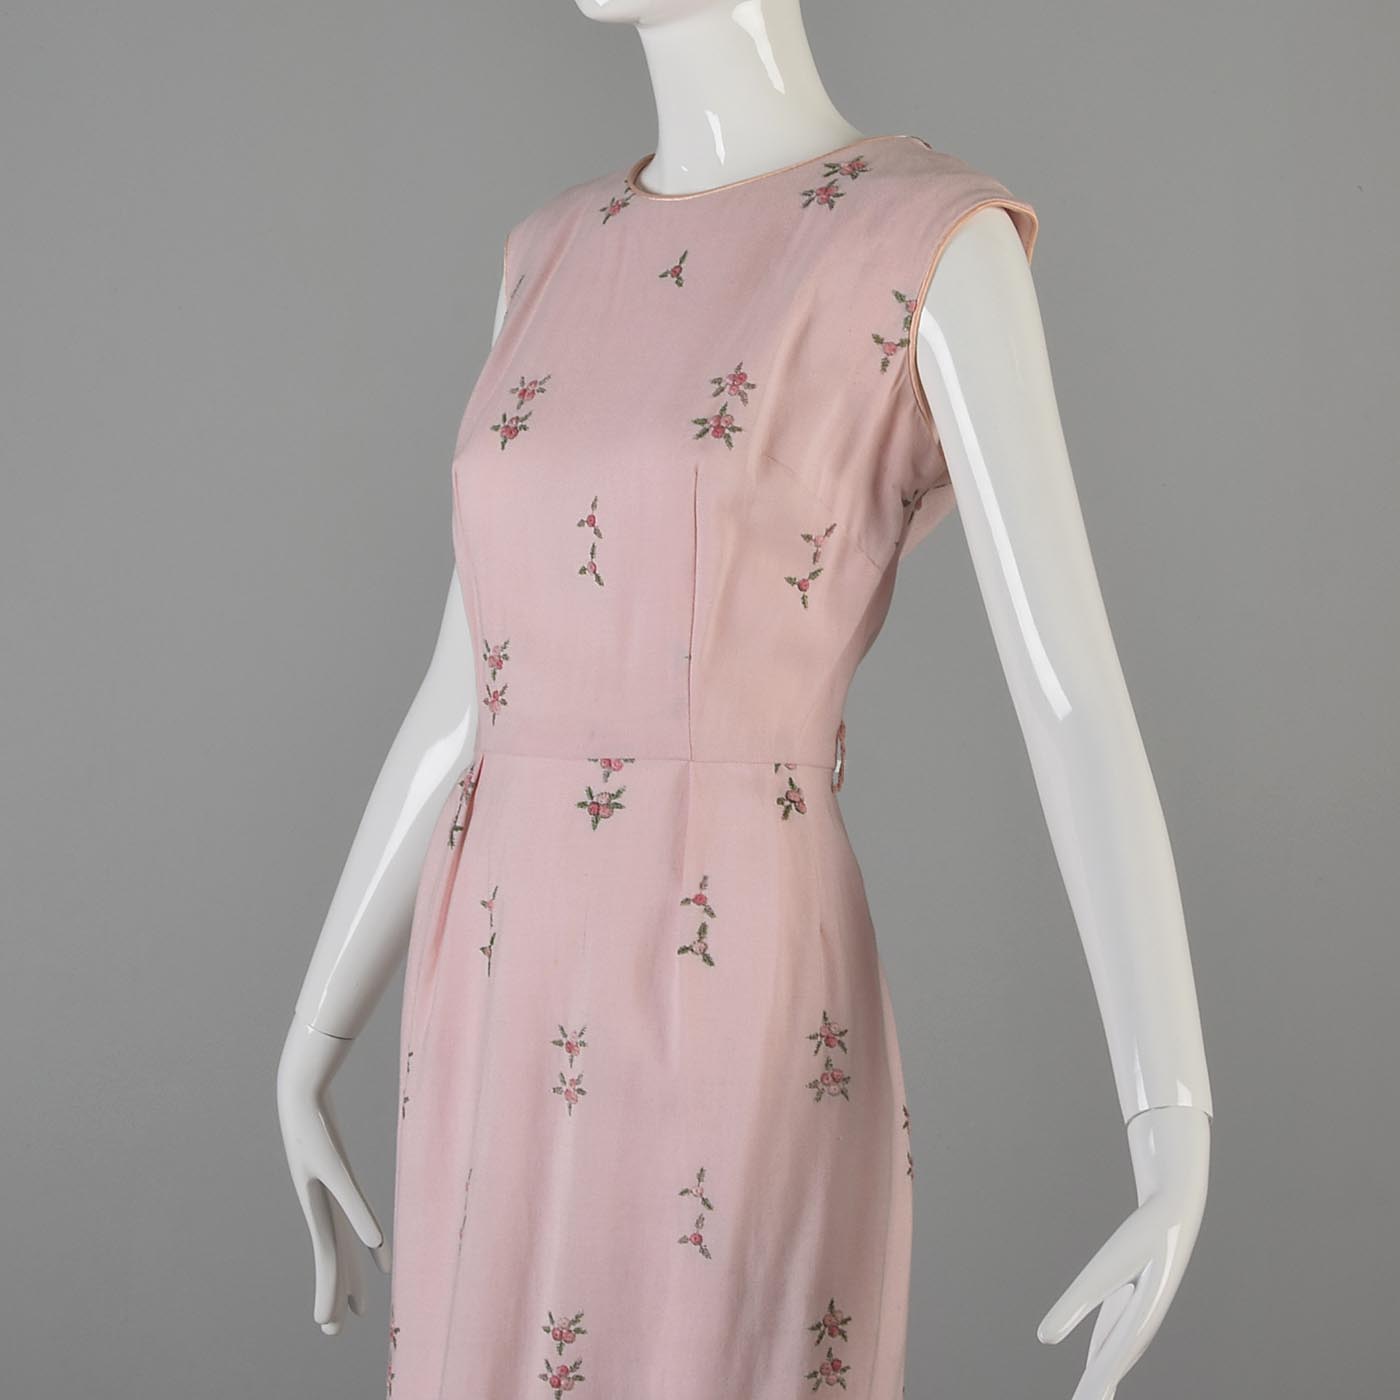 1950s Pink Sleeveless Day Dress with Floral Embroidery